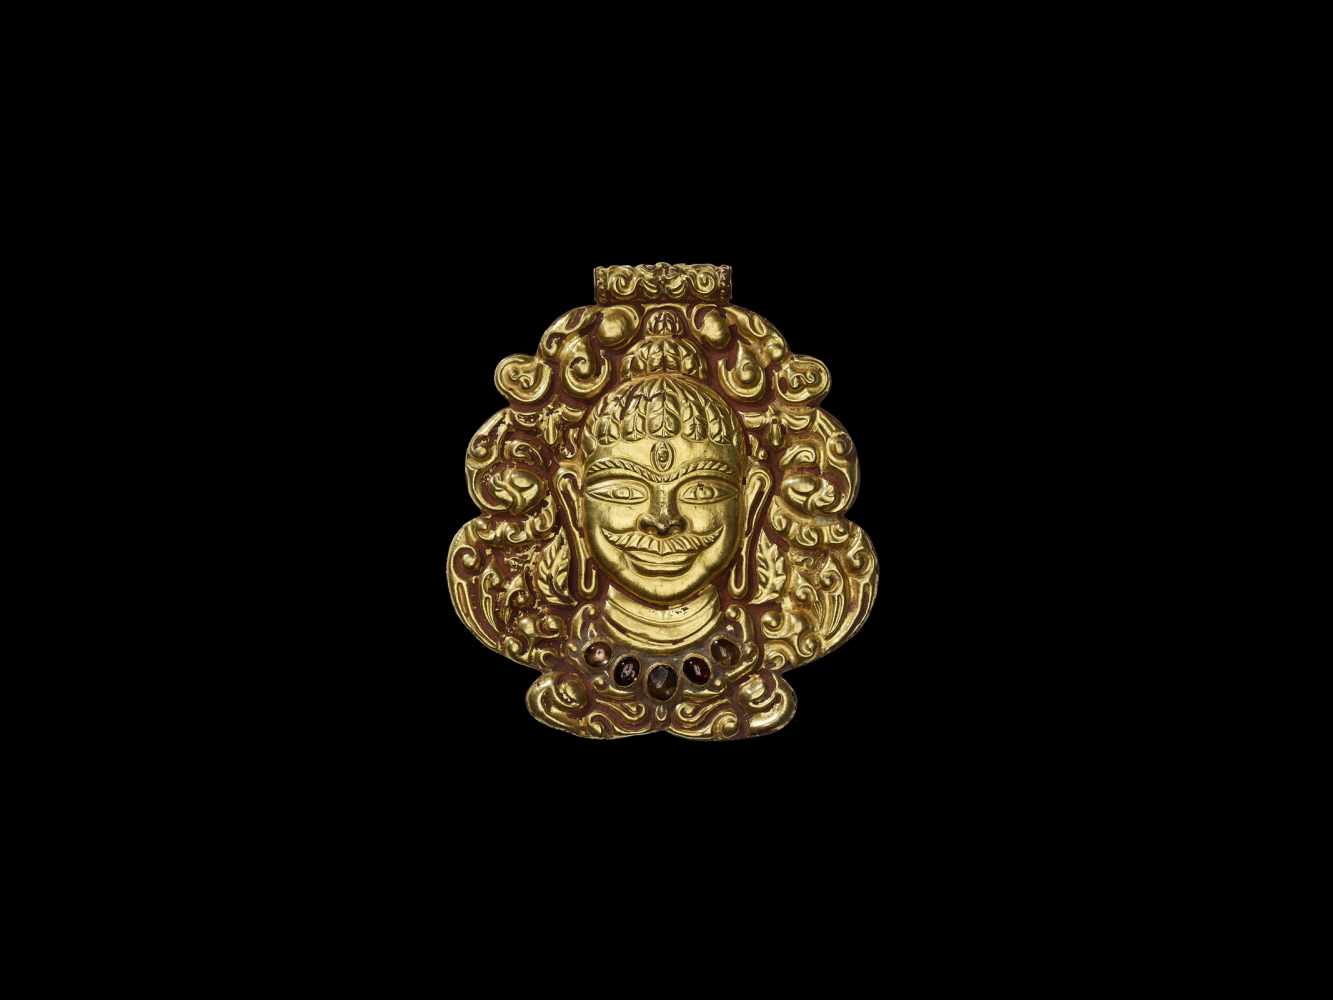 A CHAM GOLD REPOUSSÉ PENDANT DEPICTING SHIVA WITH GEMSTONES Champa, classical period, 10th